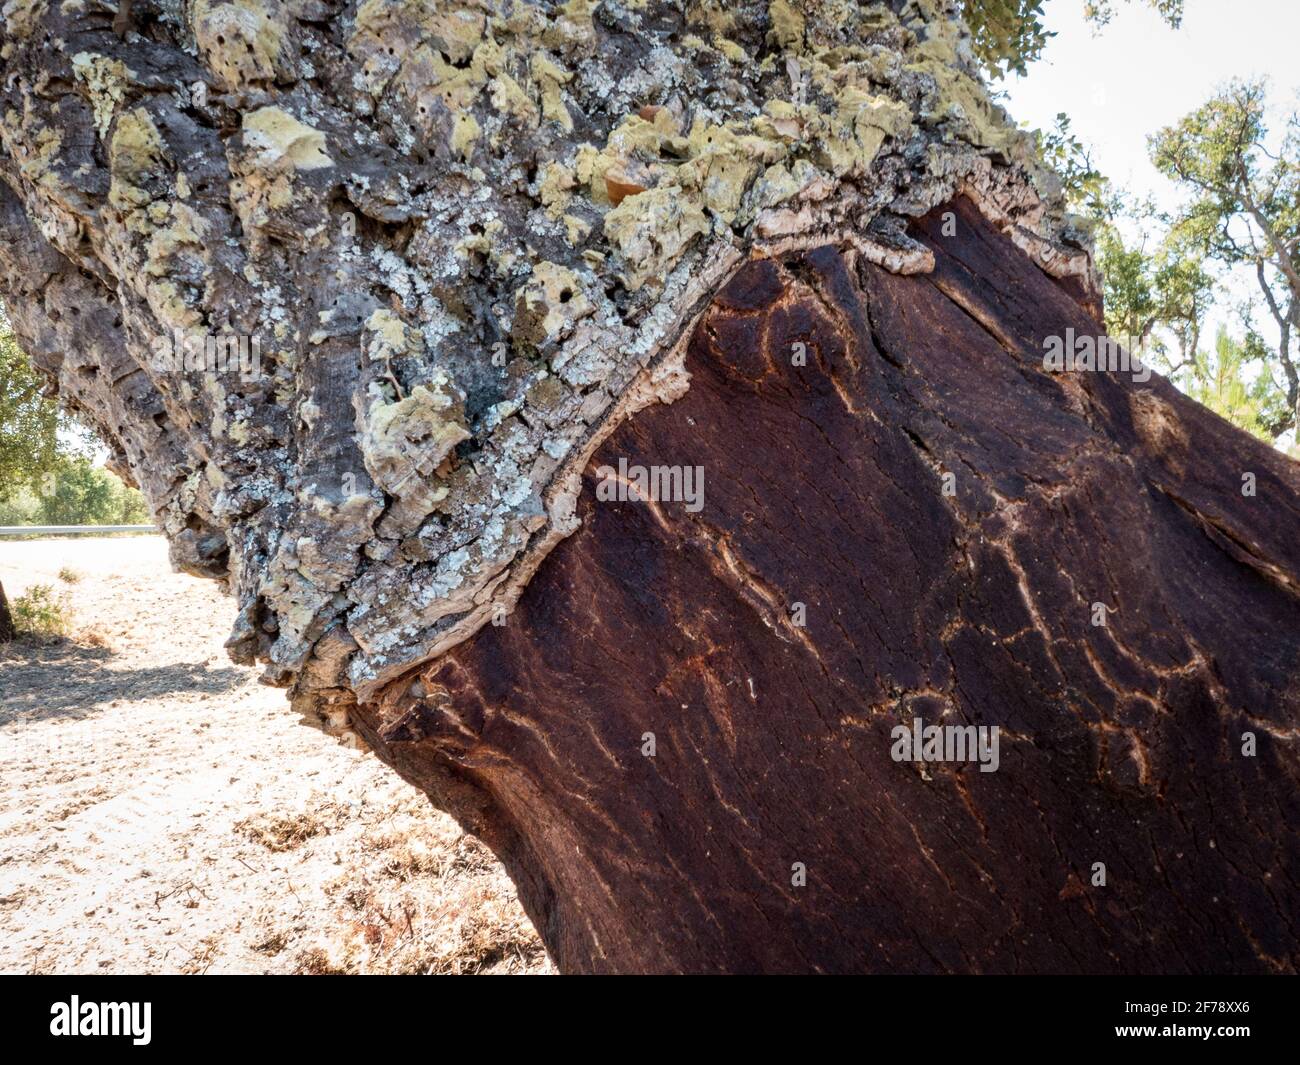 Close-up of a partly stripped cork oak. Corktrees are a common sight in the South of Portugal. The country is one of the biggest producers of natural cork. Stock Photo